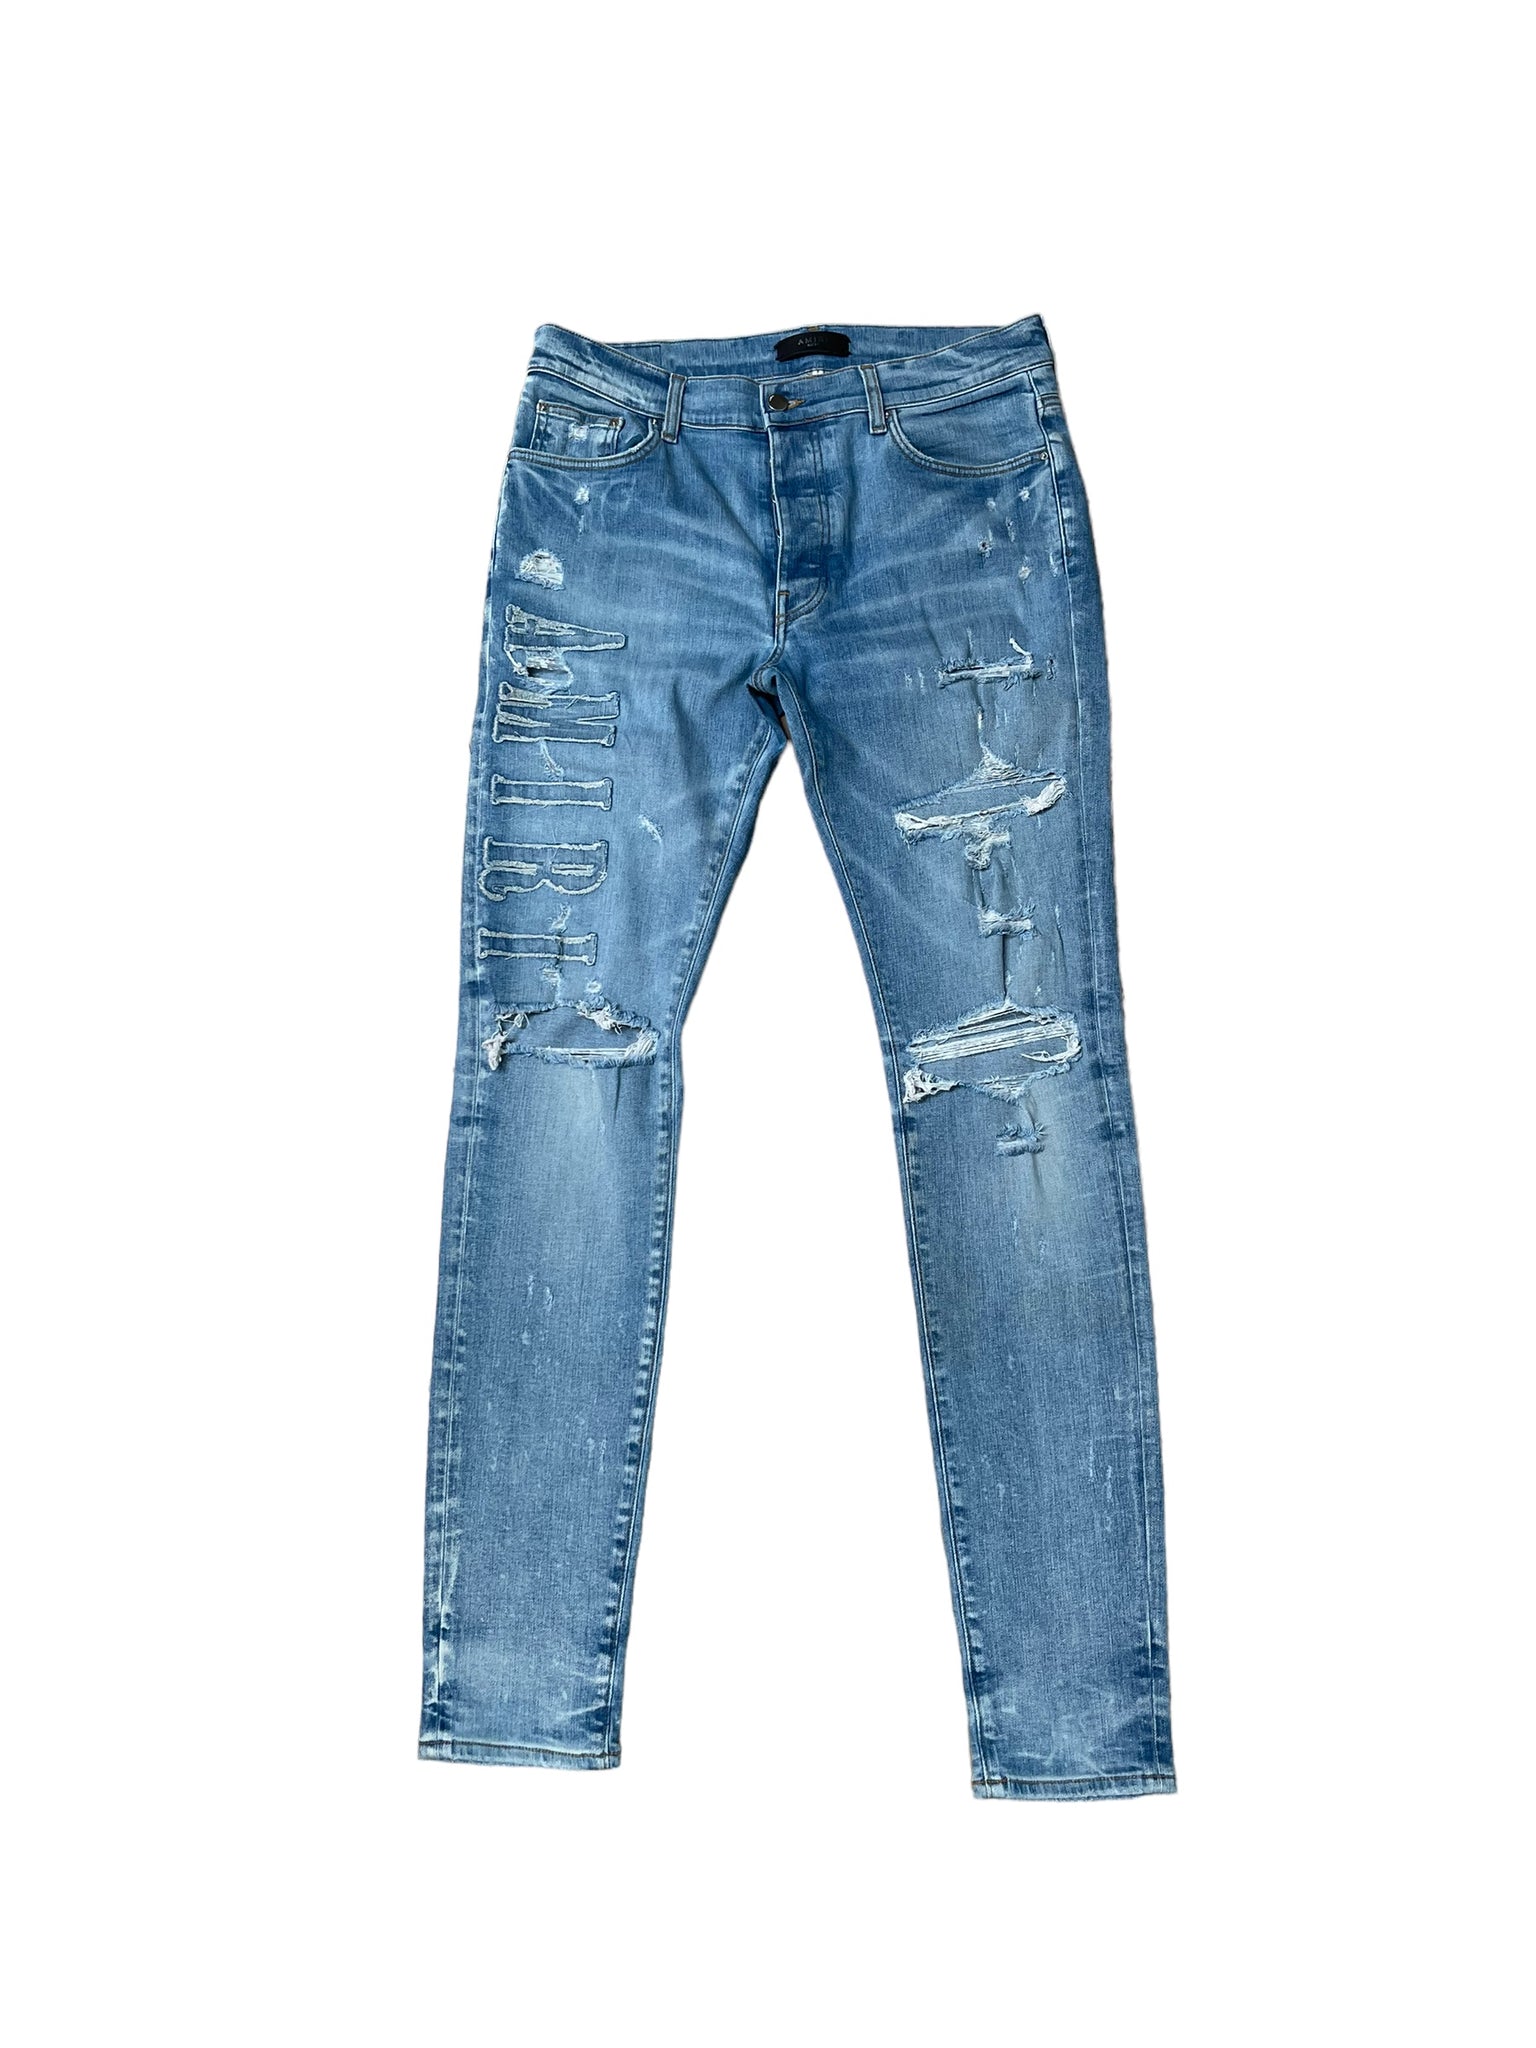 Amiri Logo Patch Jeans "Light Wash" (Pre-Owned)